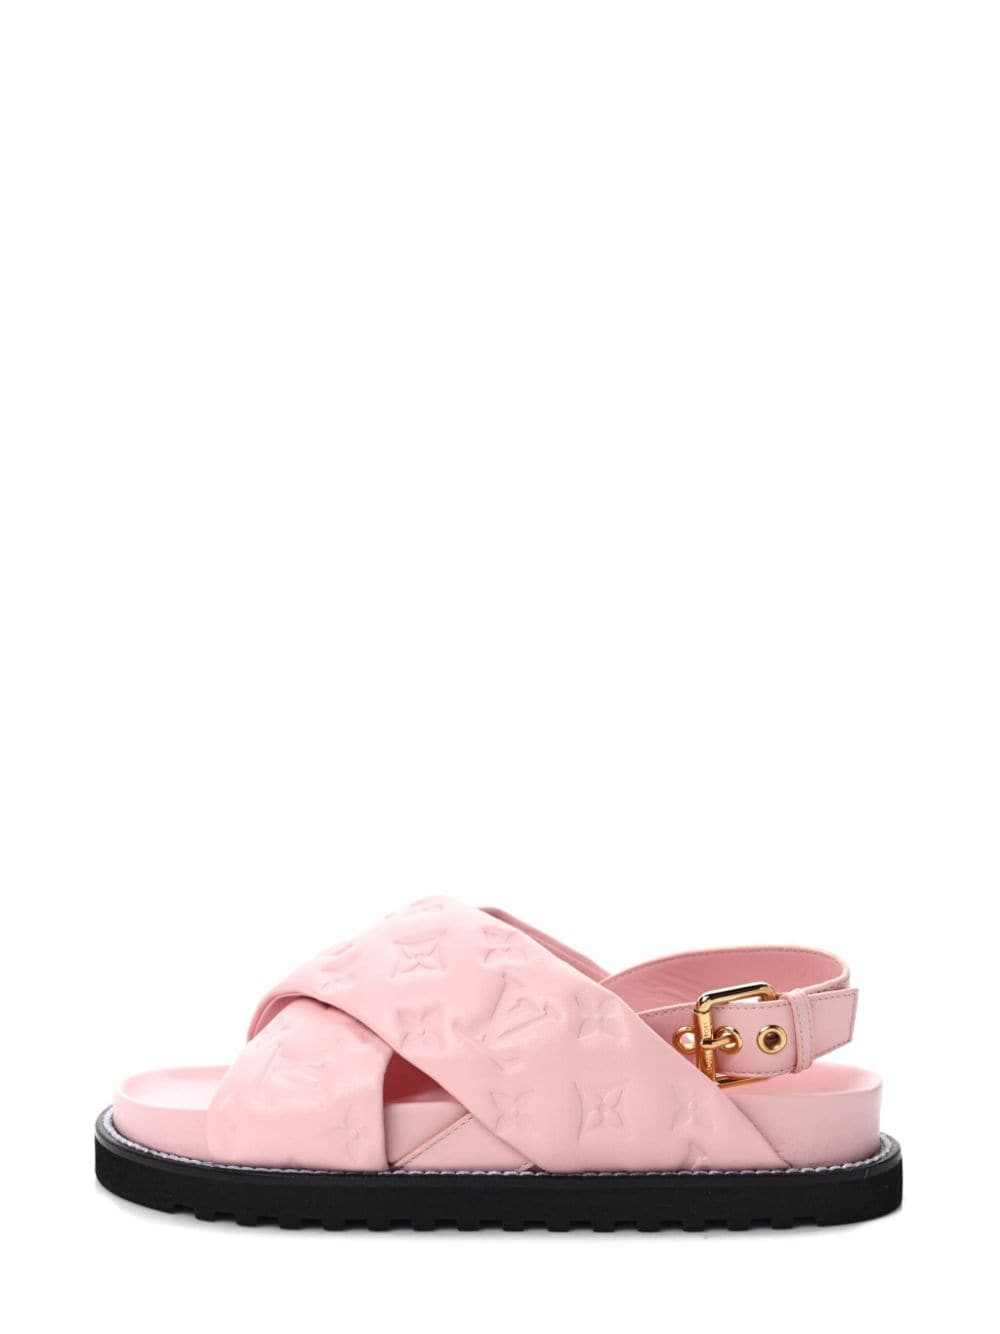 Pre-owned Louis Vuitton Paseo Sandals In Pink